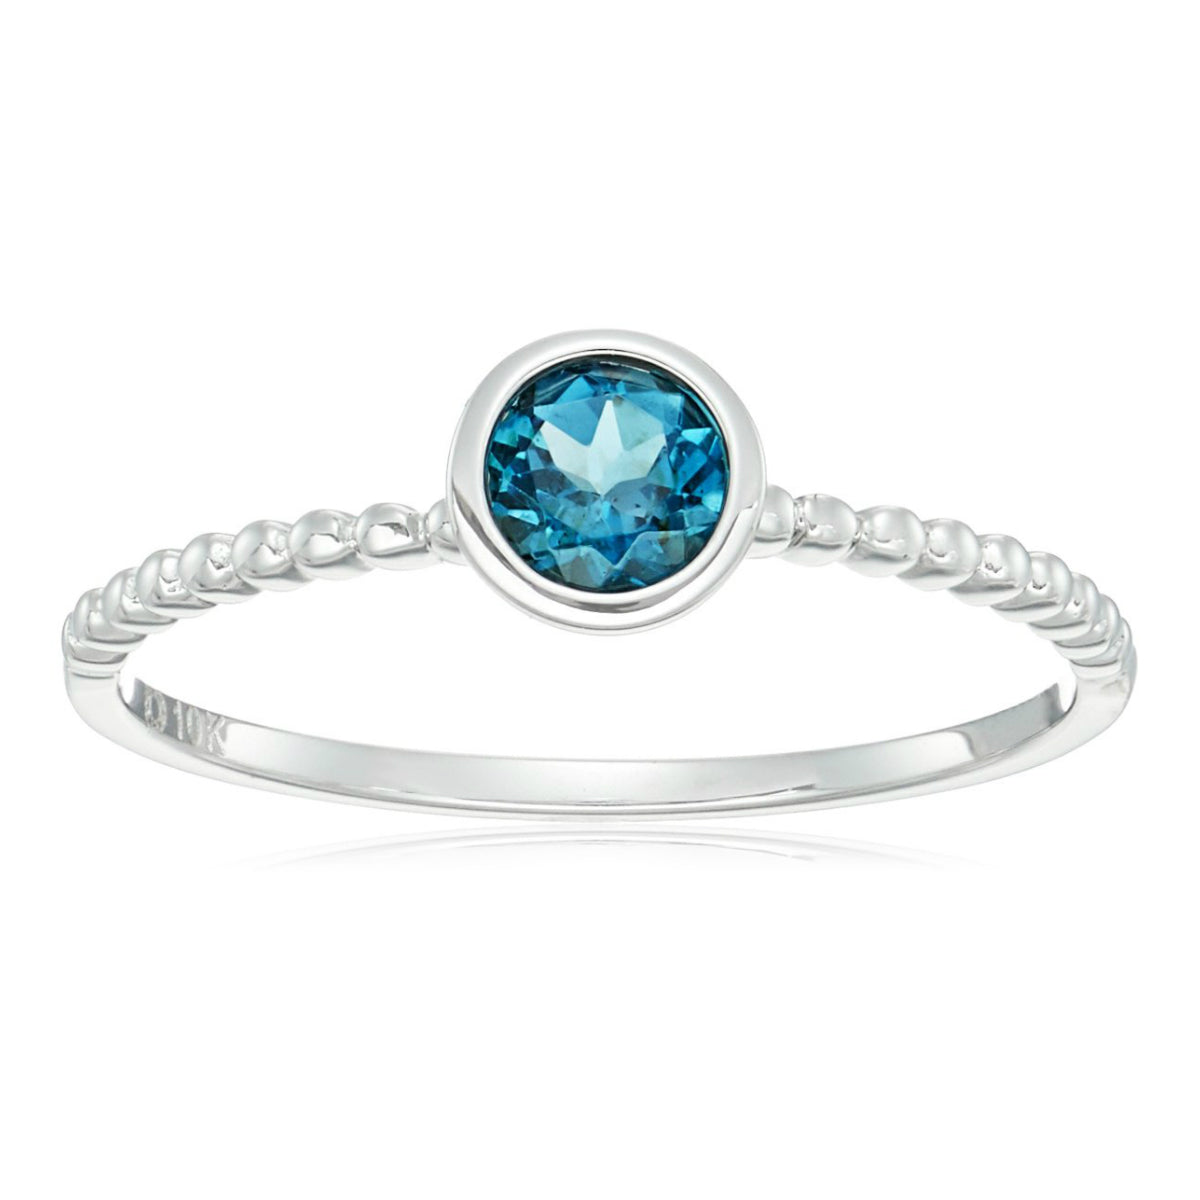 10k White Gold London Blue Topaz Solitaire Beaded Shank Stackable Ring - pinctore